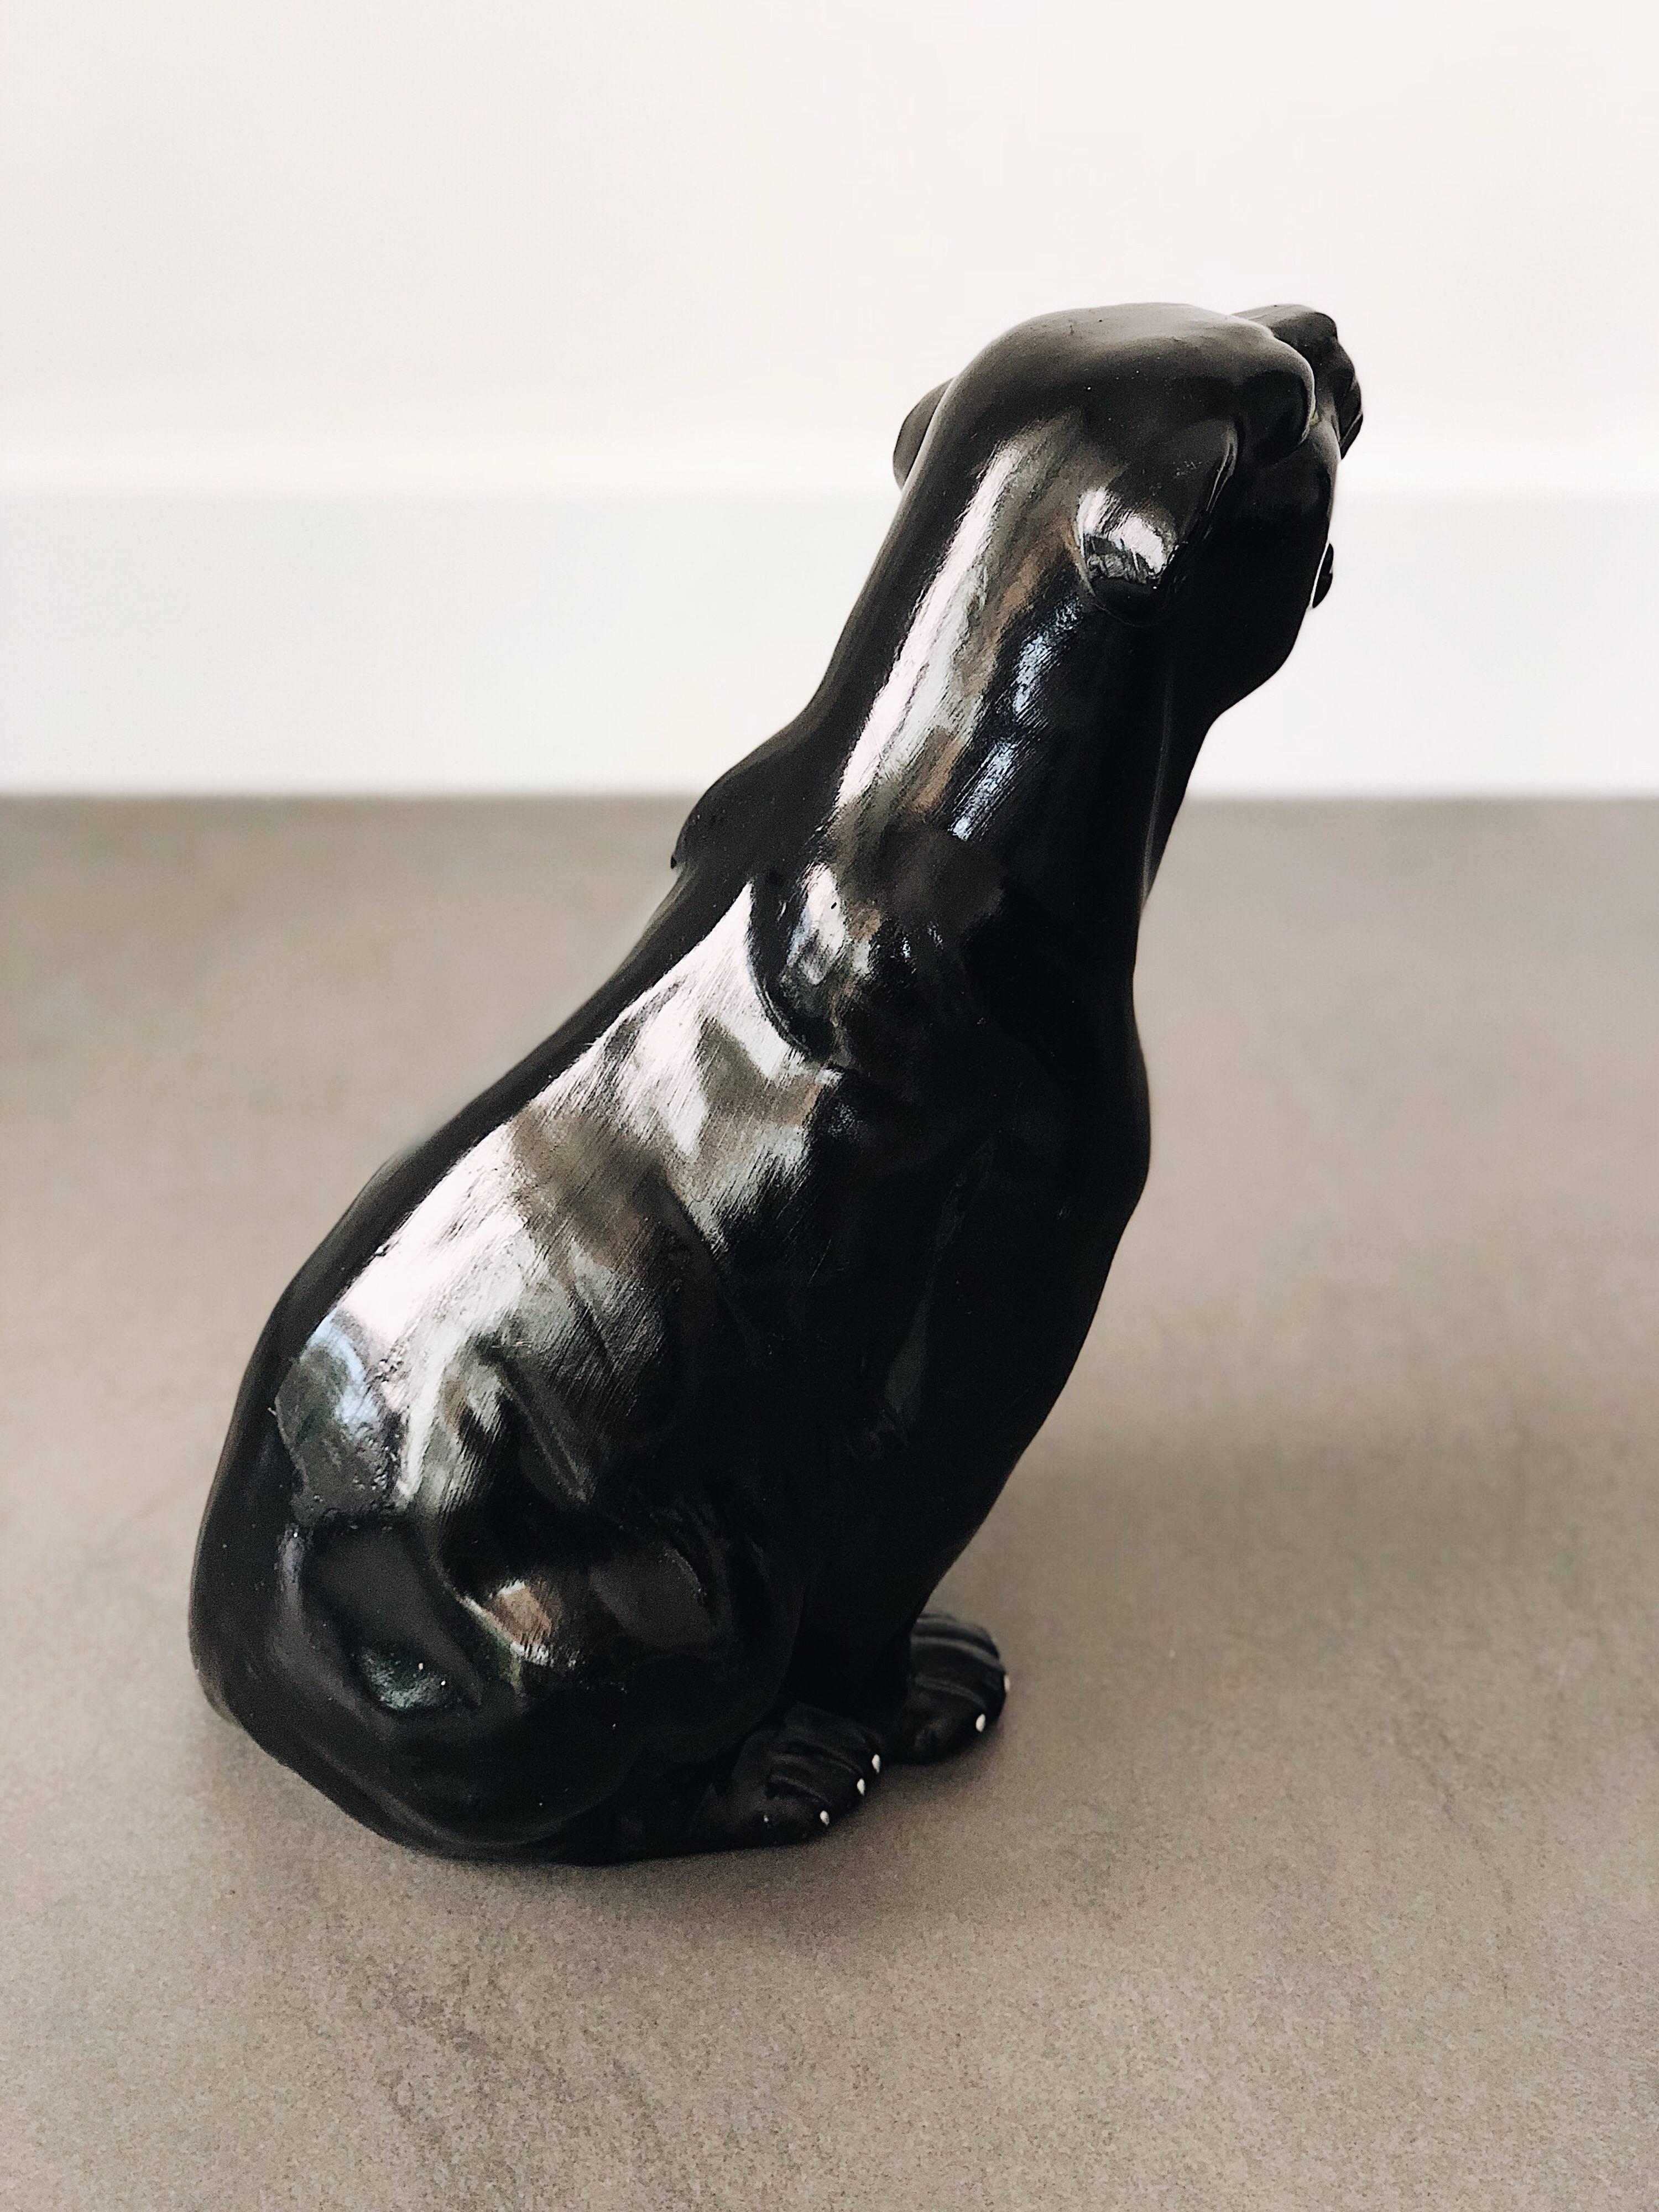 Hand-Painted Small Black Panther Ceramic Sculpture, Italy, 1960s. 